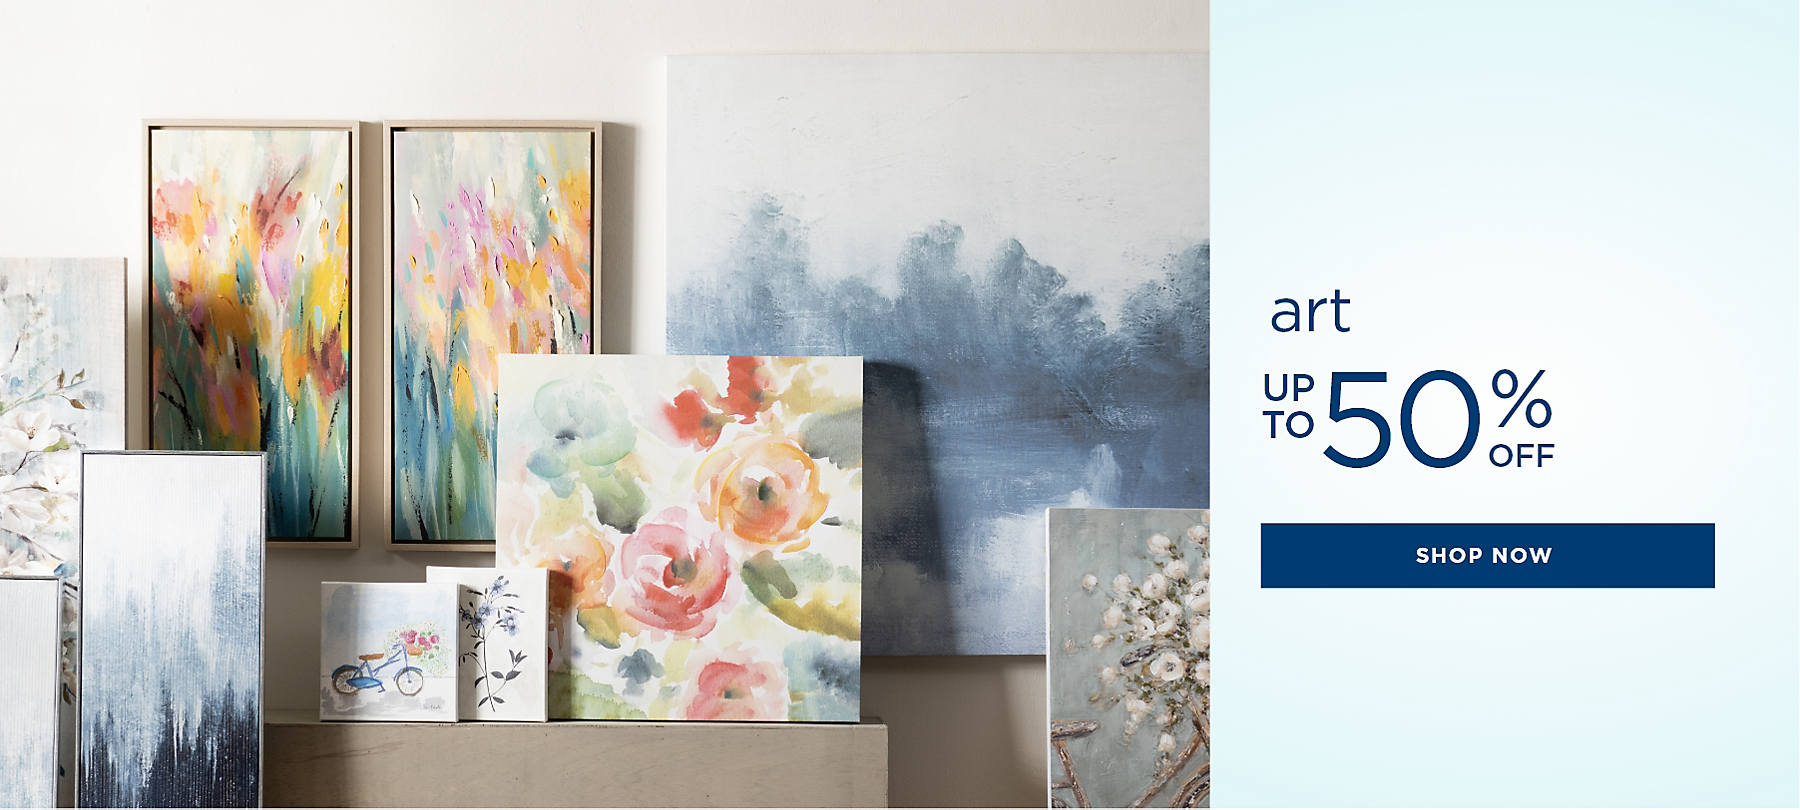 art up to 50% off shop now